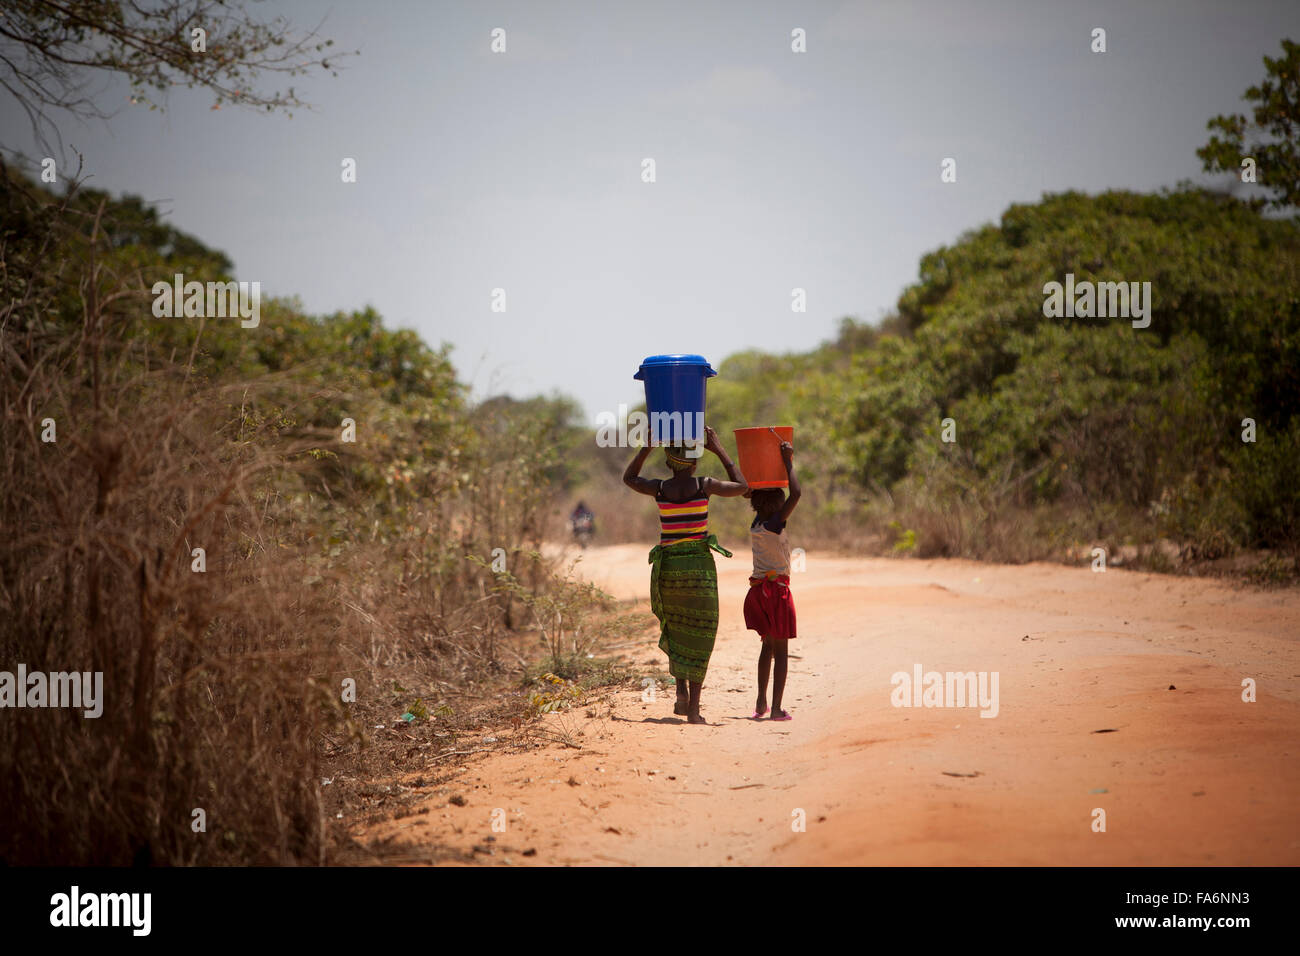 Girls return home from drawing water at an access point in Mecupes village, Mozambique. Stock Photo